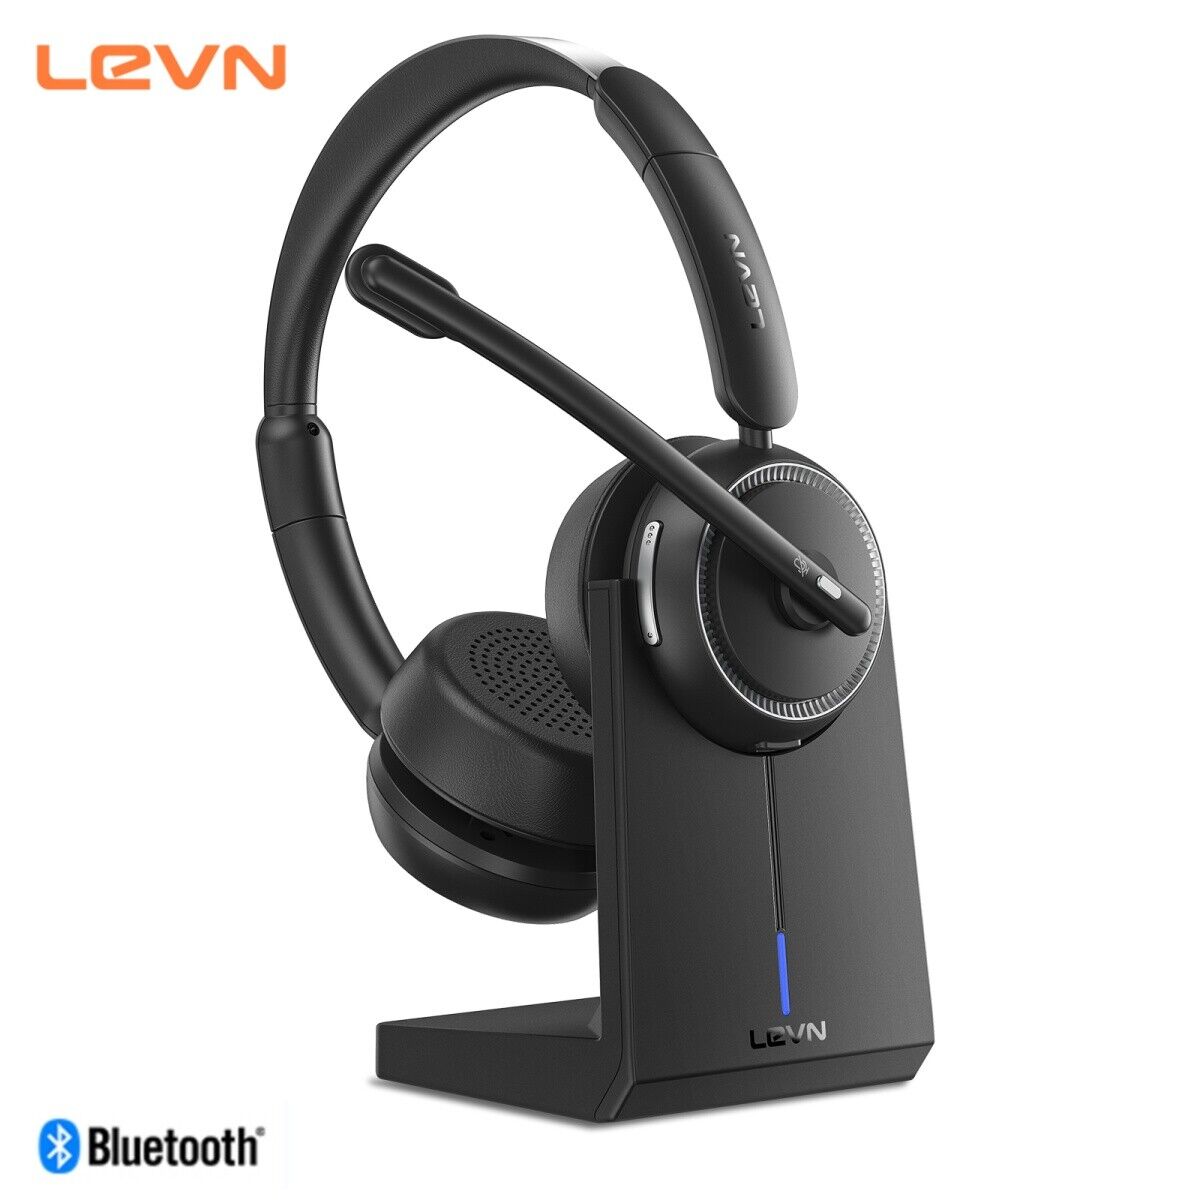 LEVN Bluetooth 5.2 Wireless Headset Noise Canceling Microphone For Remote Work